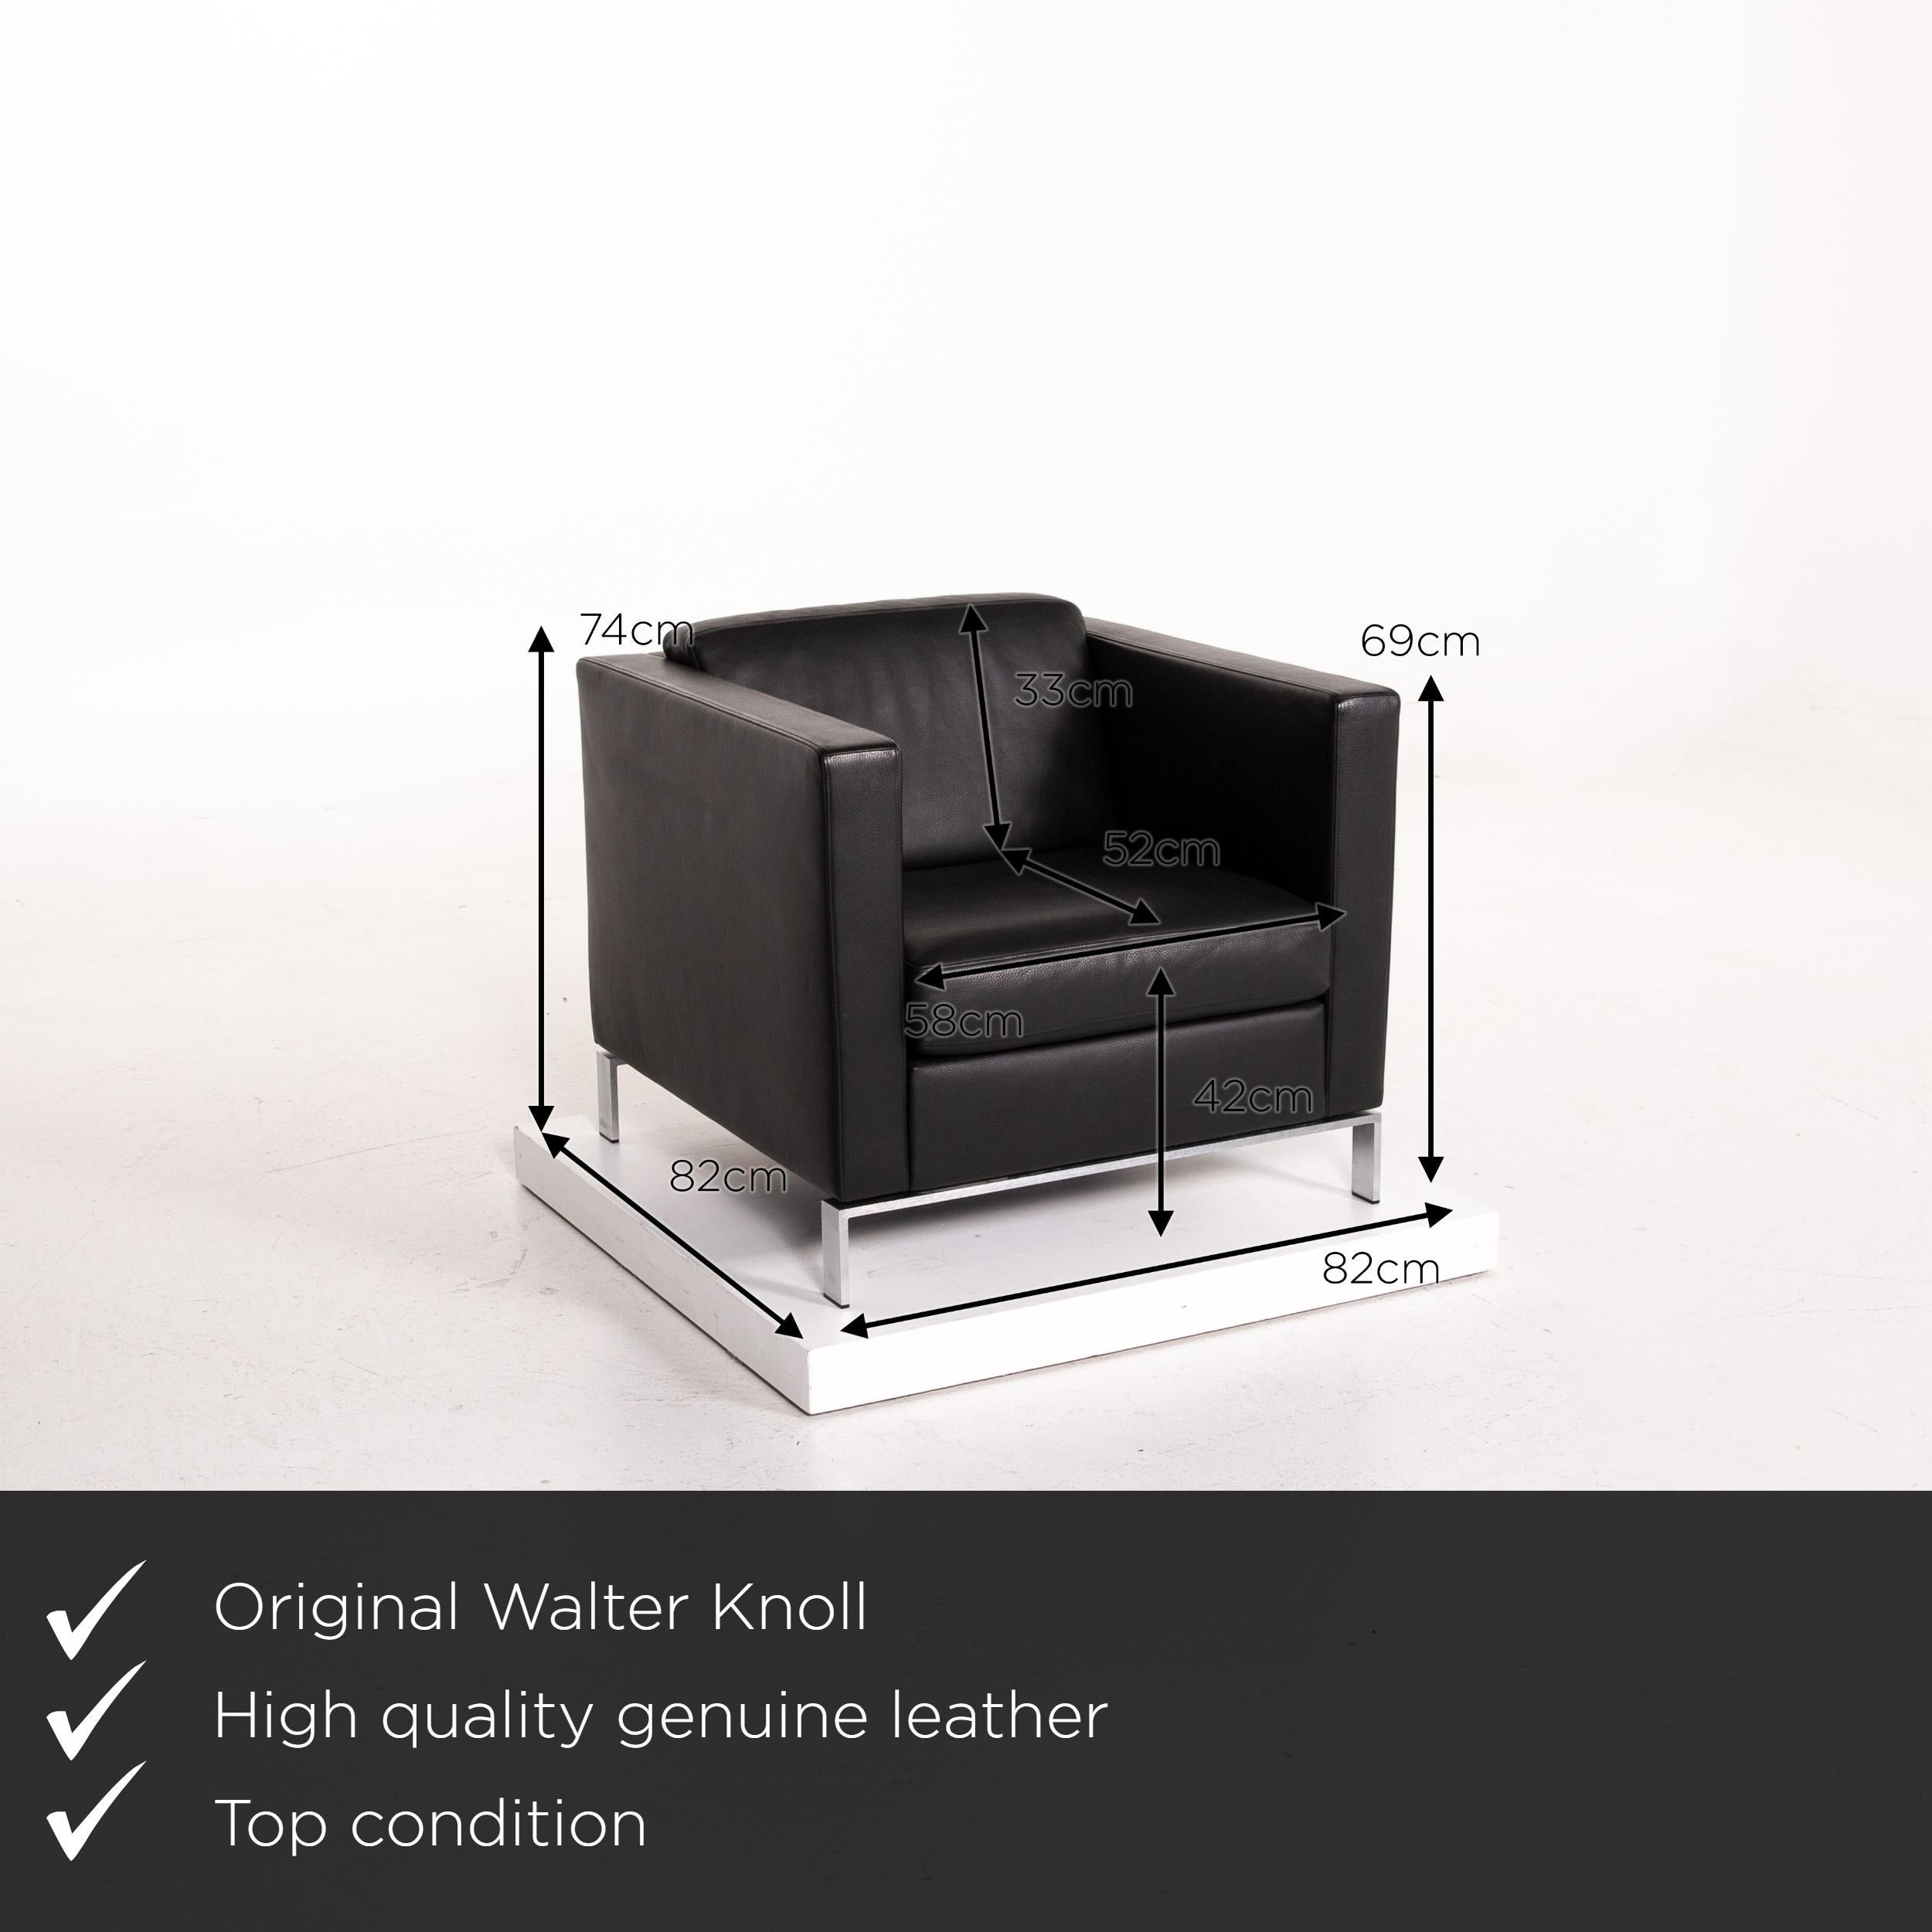 We present to you a Walter Knoll Foster 500 leather armchair black.


 Product measurements in centimeters:
 

Depth 82
Width 82
Height 74
Seat height 42
Rest height 69
Seat depth 52
Seat width 58
Back height 33.
 